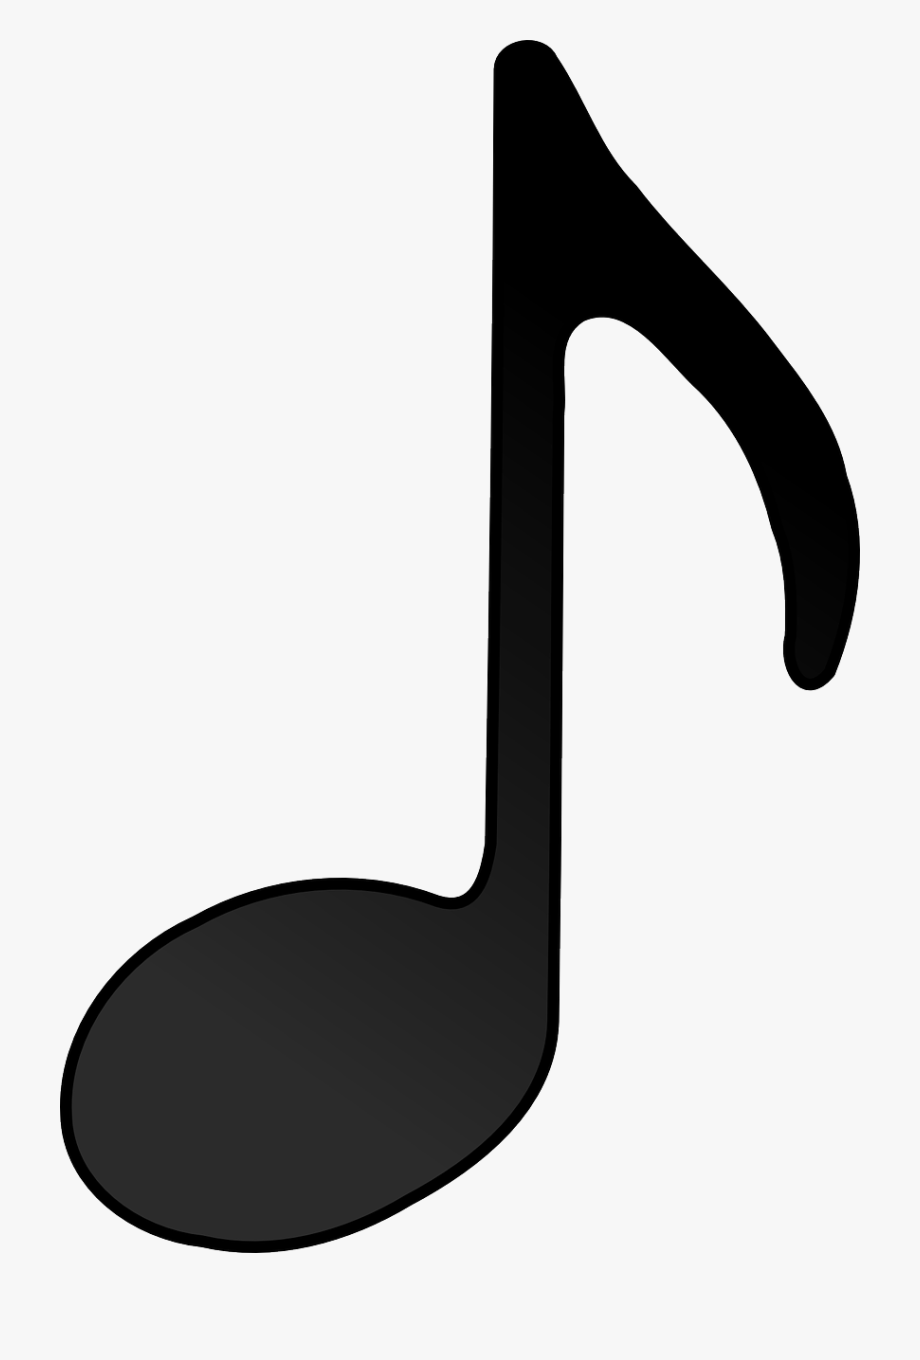 black and white music notes clipart 10 free Cliparts | Download images